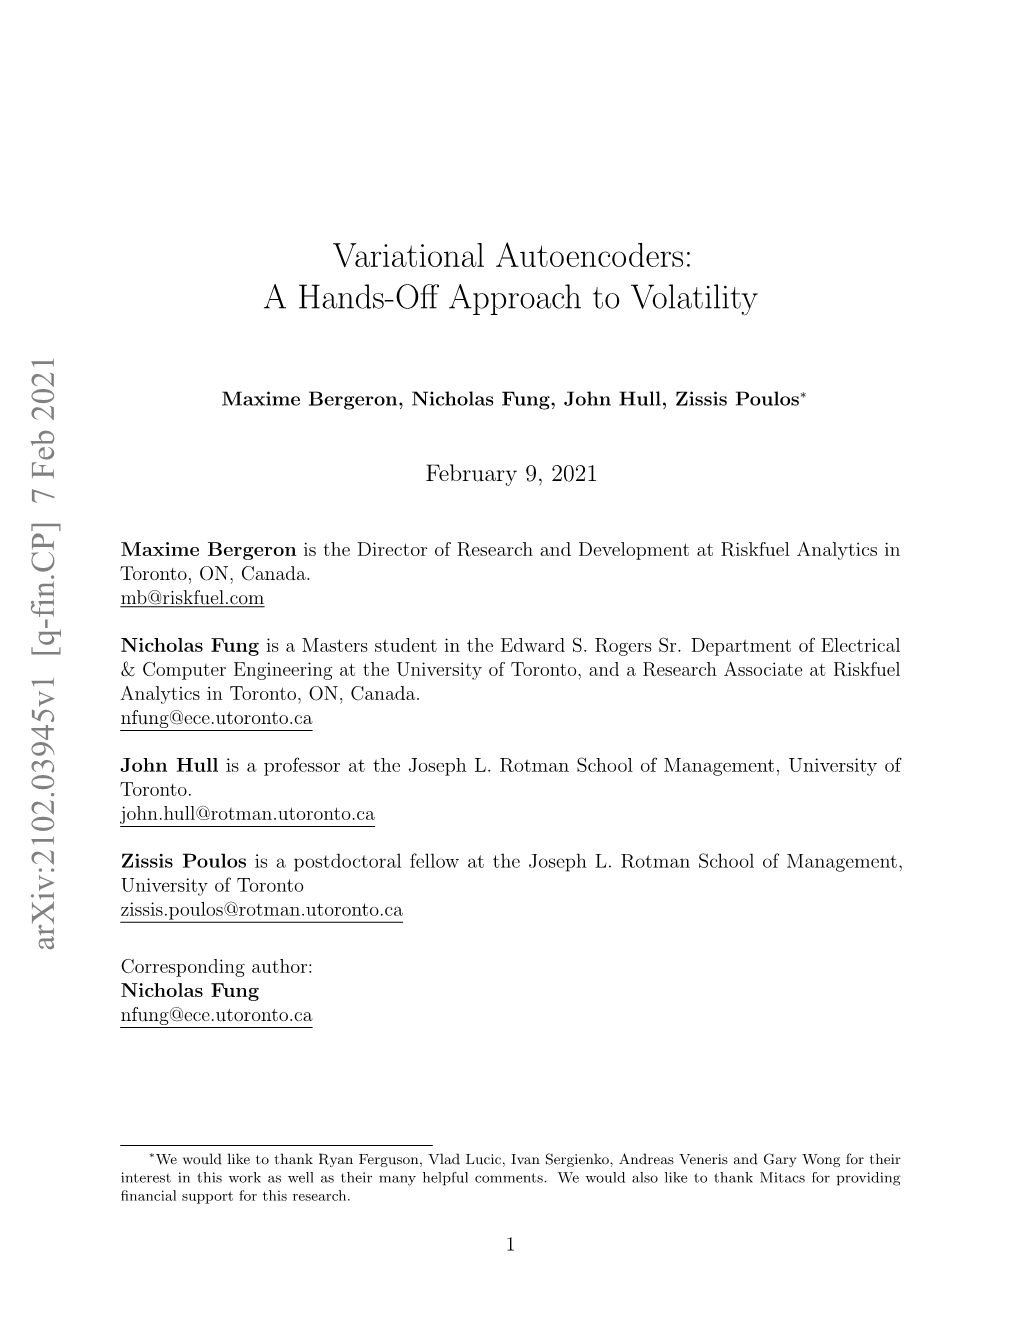 Variational Autoencoders: a Hands-Off Approach to Volatility